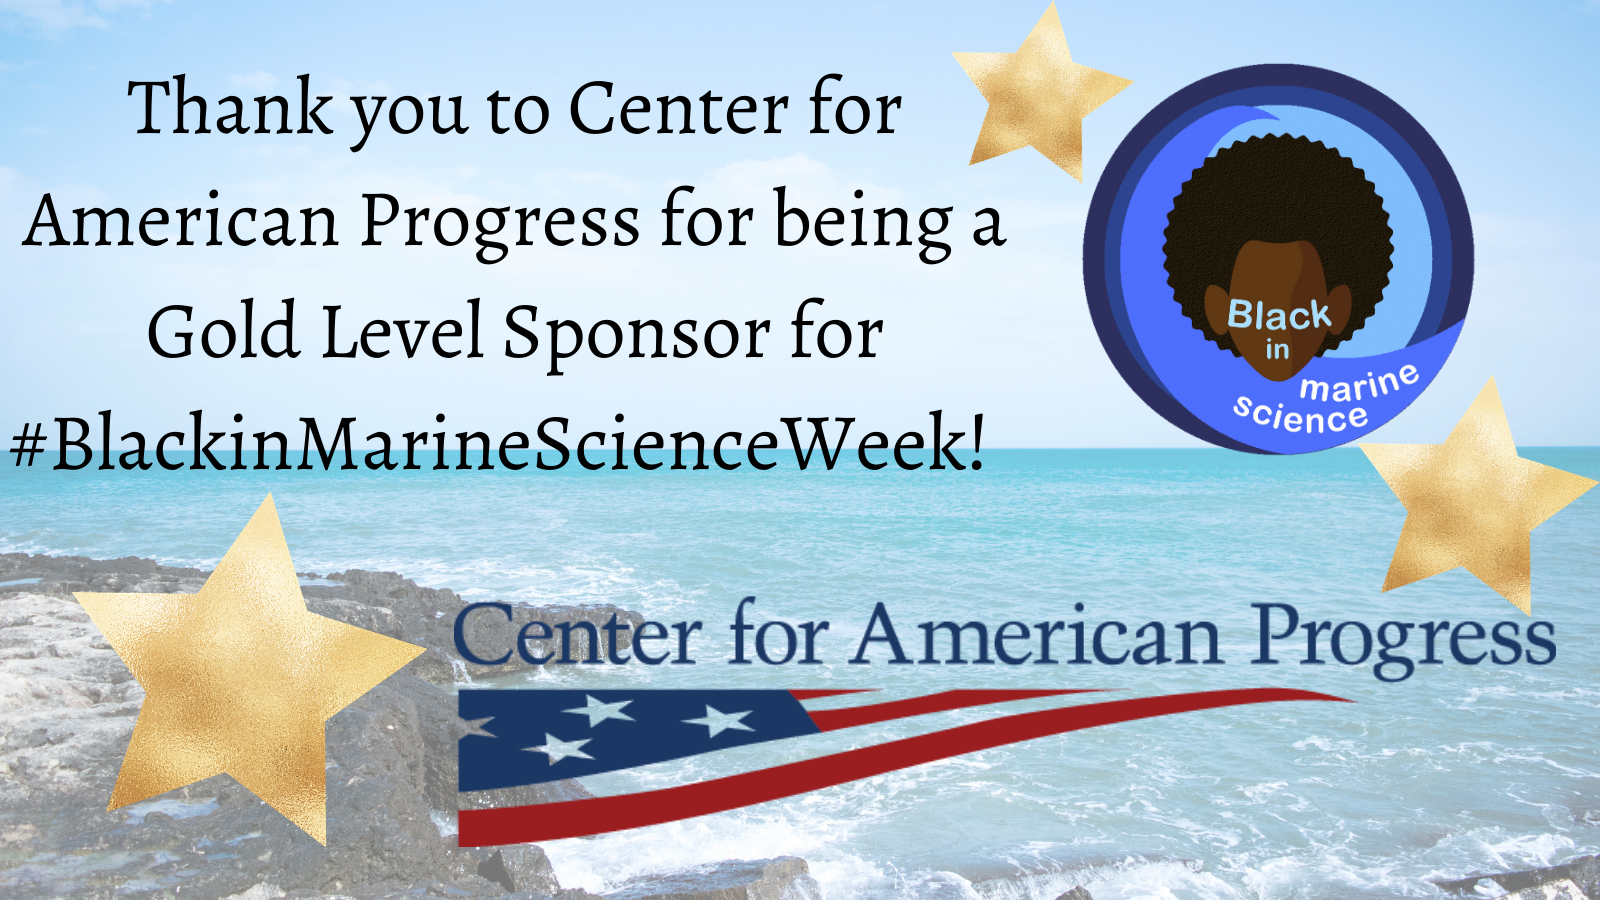 Thank you to the Center for American Progress for being a Gold Level Sponsor for Black in Marine Science Week